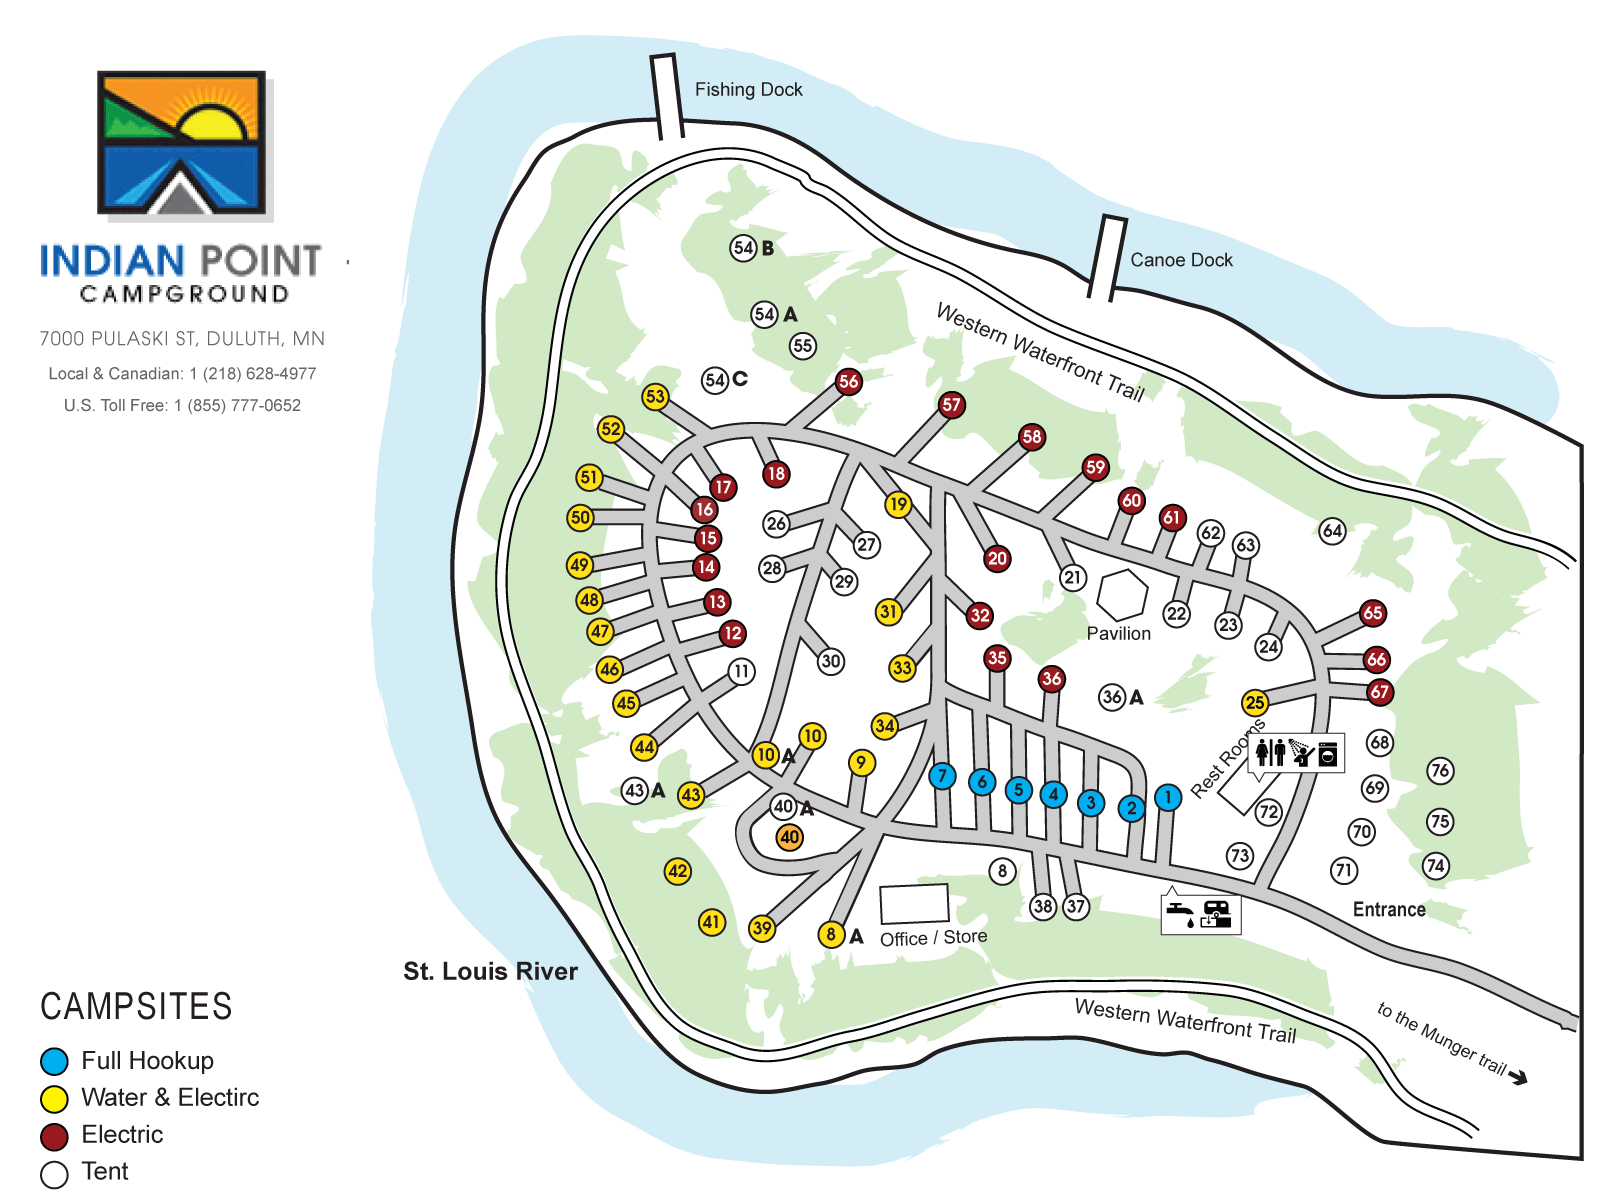 Indian Point Campground Map, Dulut, MN